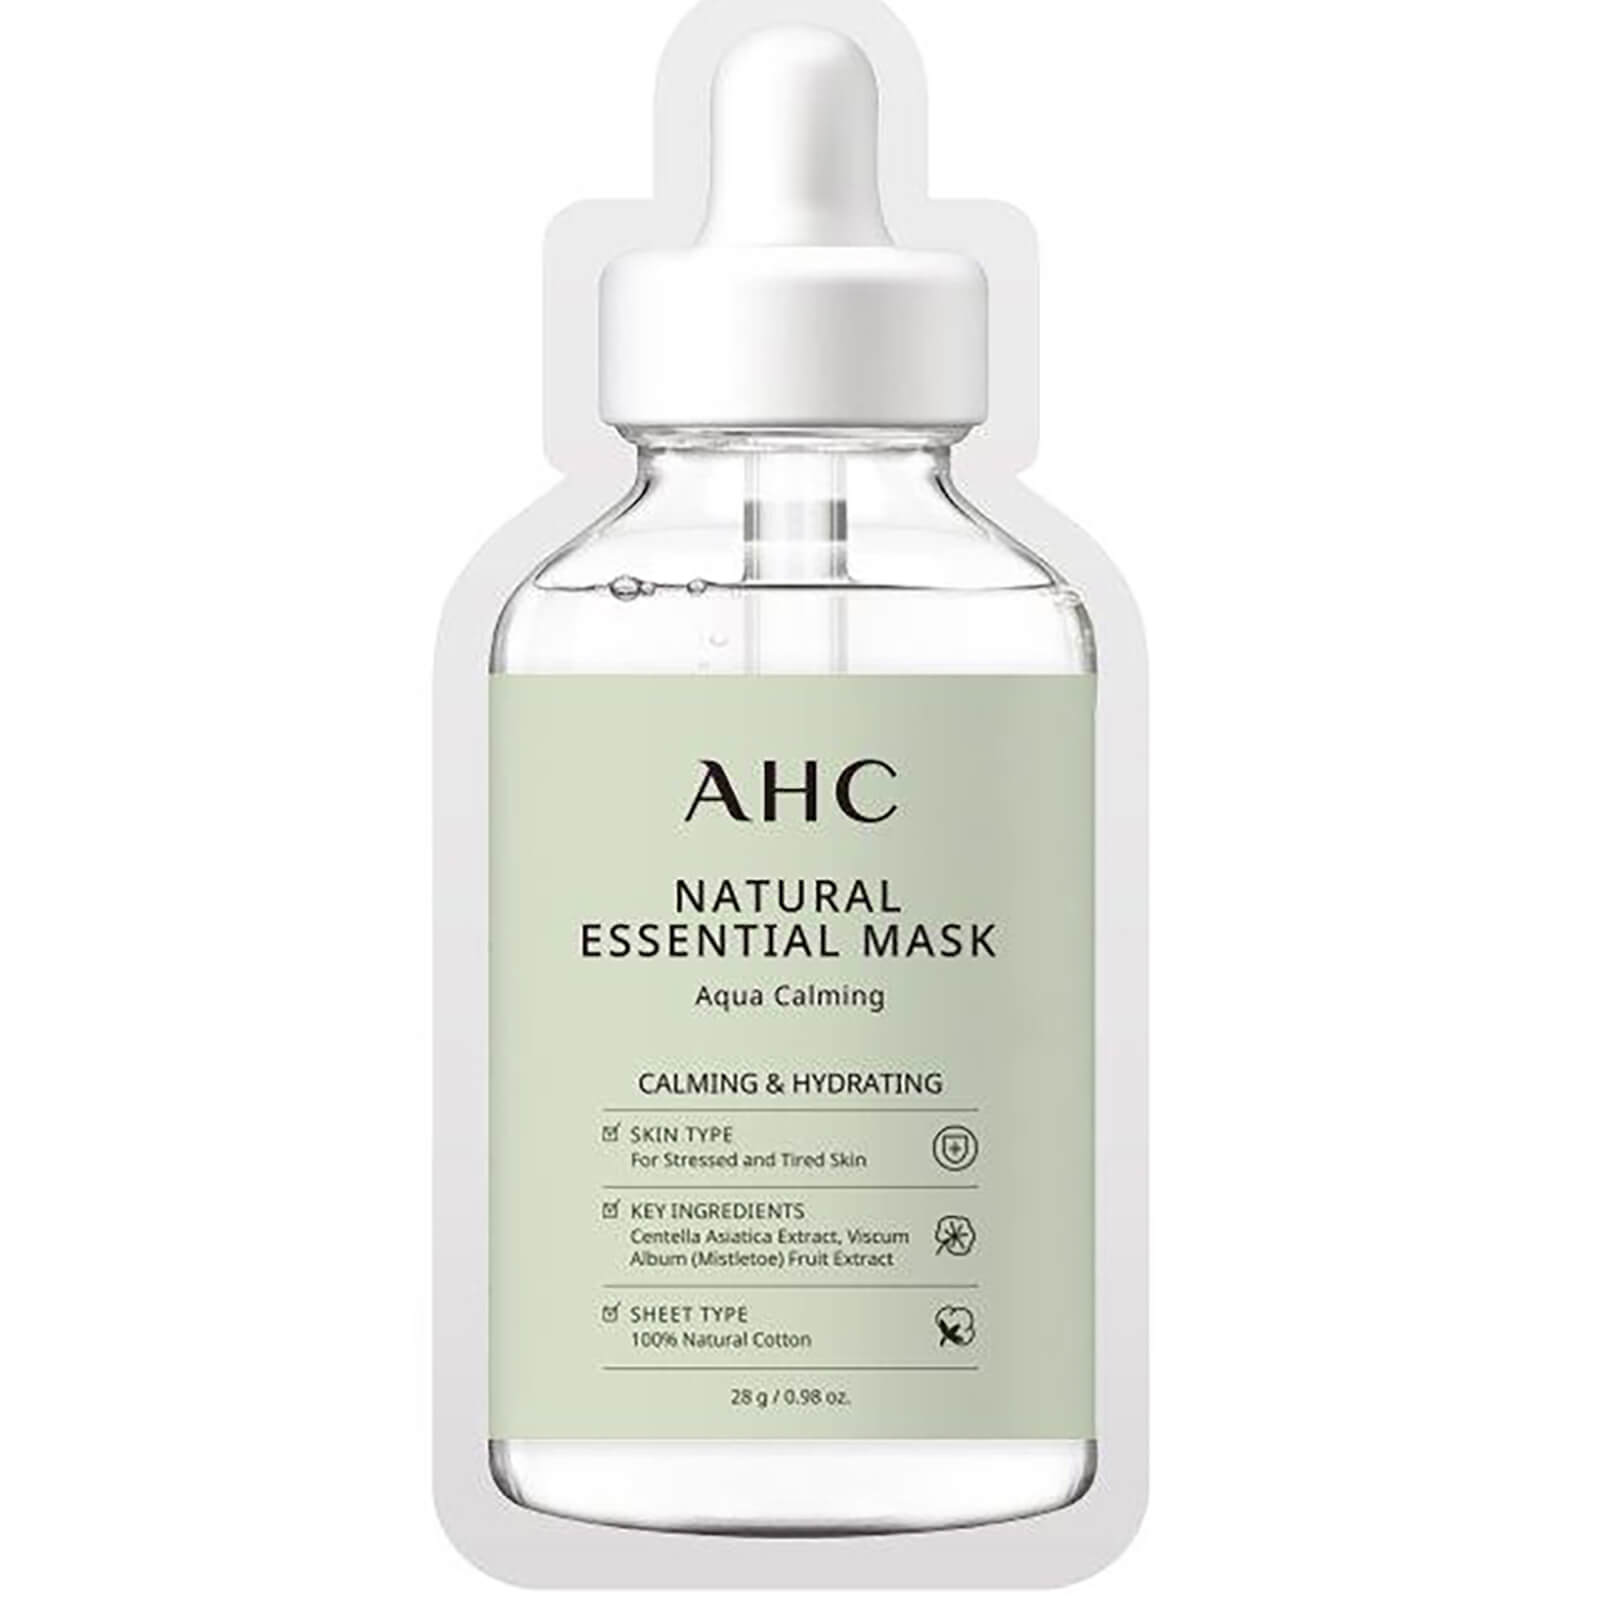 AHC NATURAL ESSENTIAL FACE MASK HYDRATING AND CALMING FOR TIRED SKIN,68308497